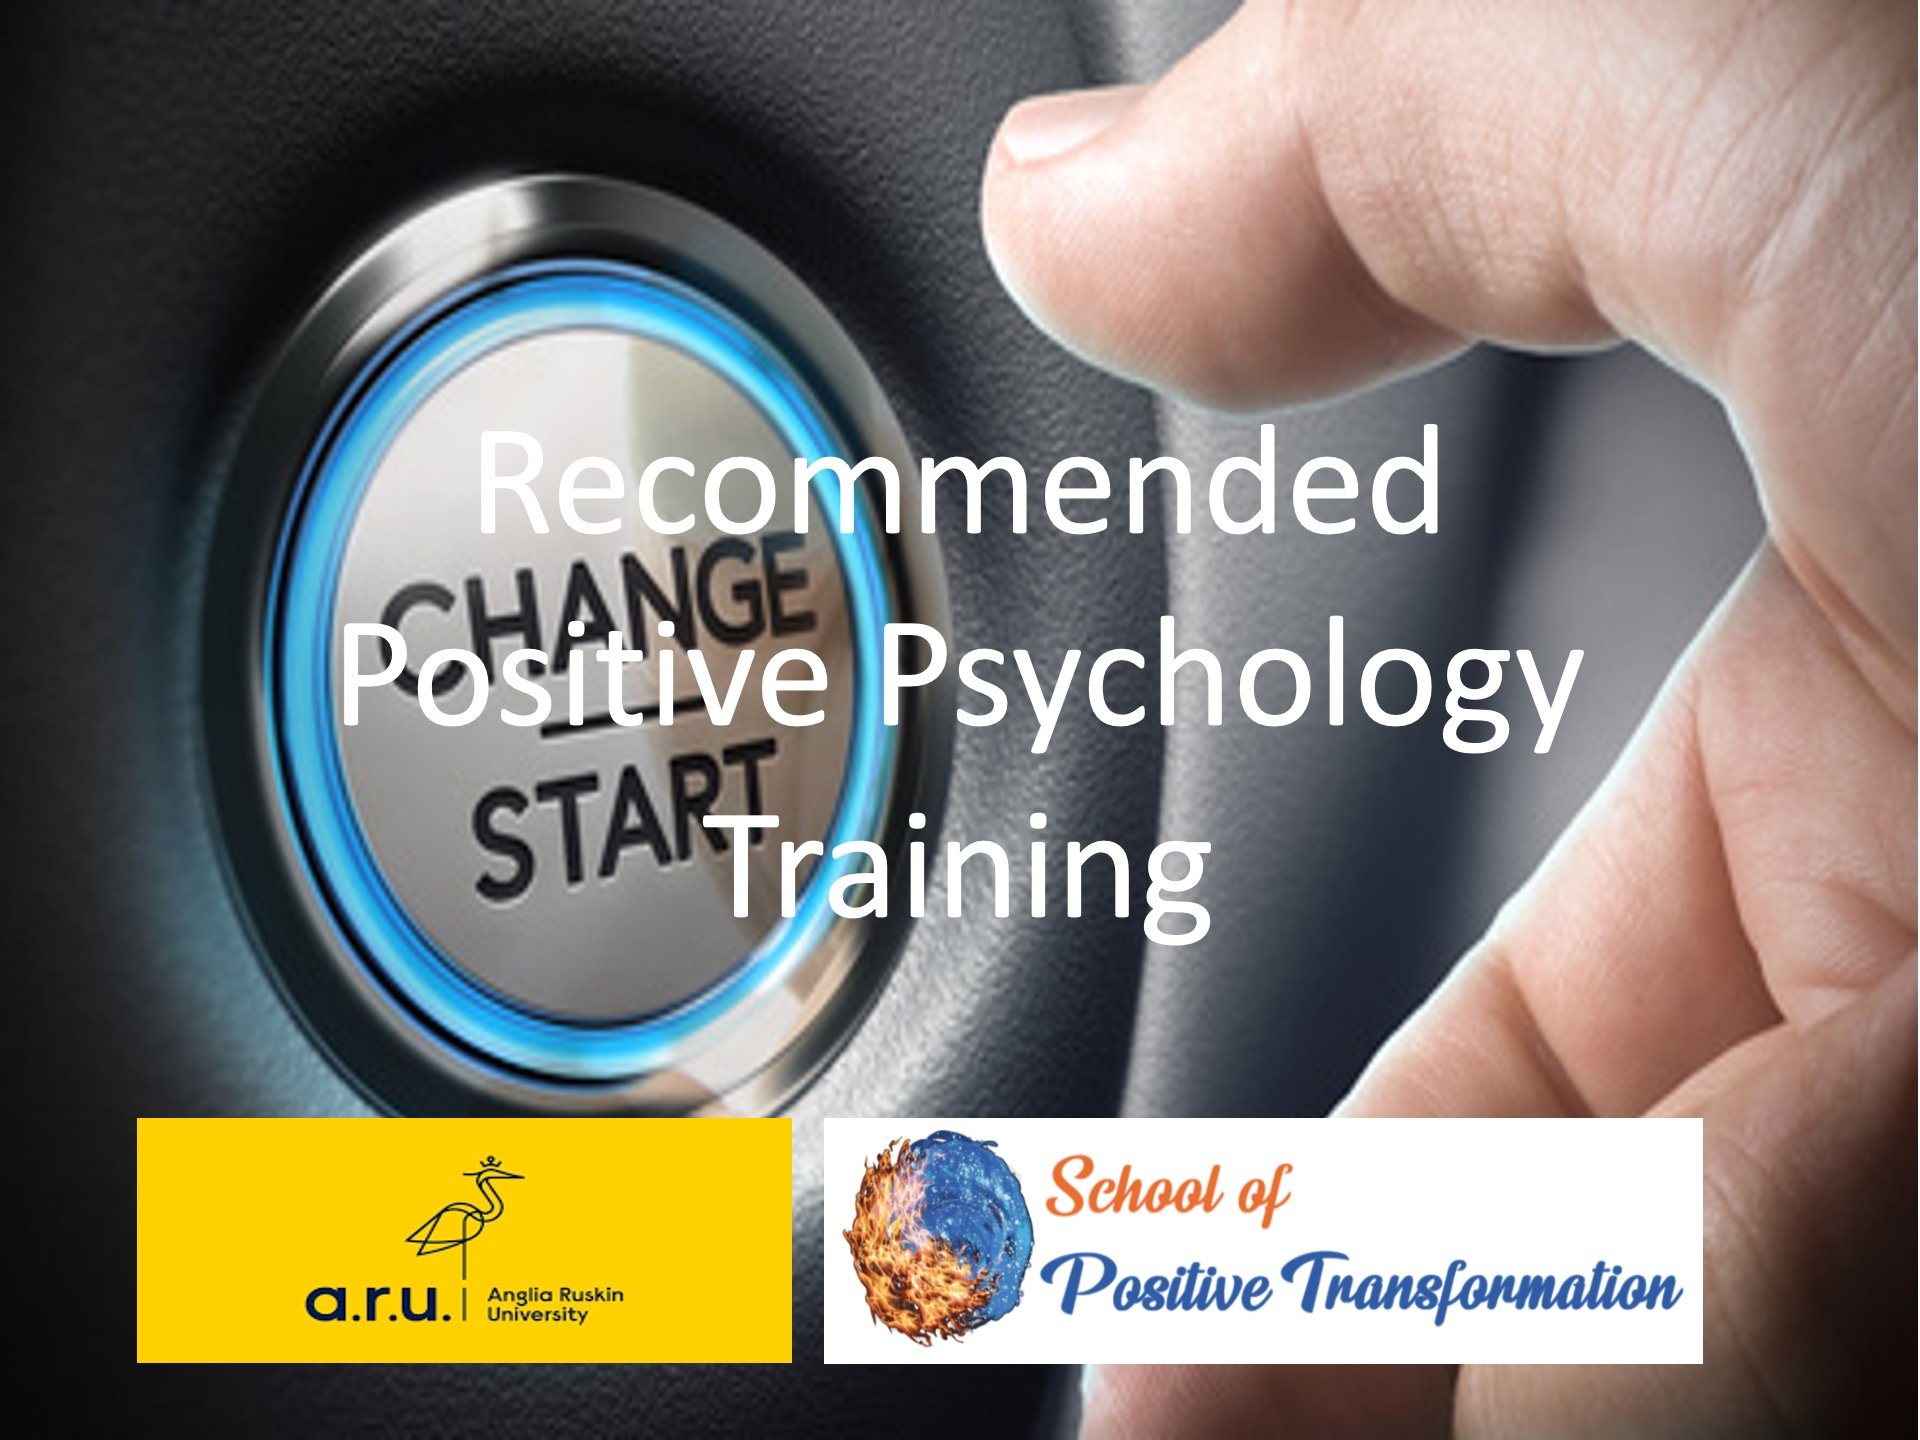 Recommended Positive Psychology Training